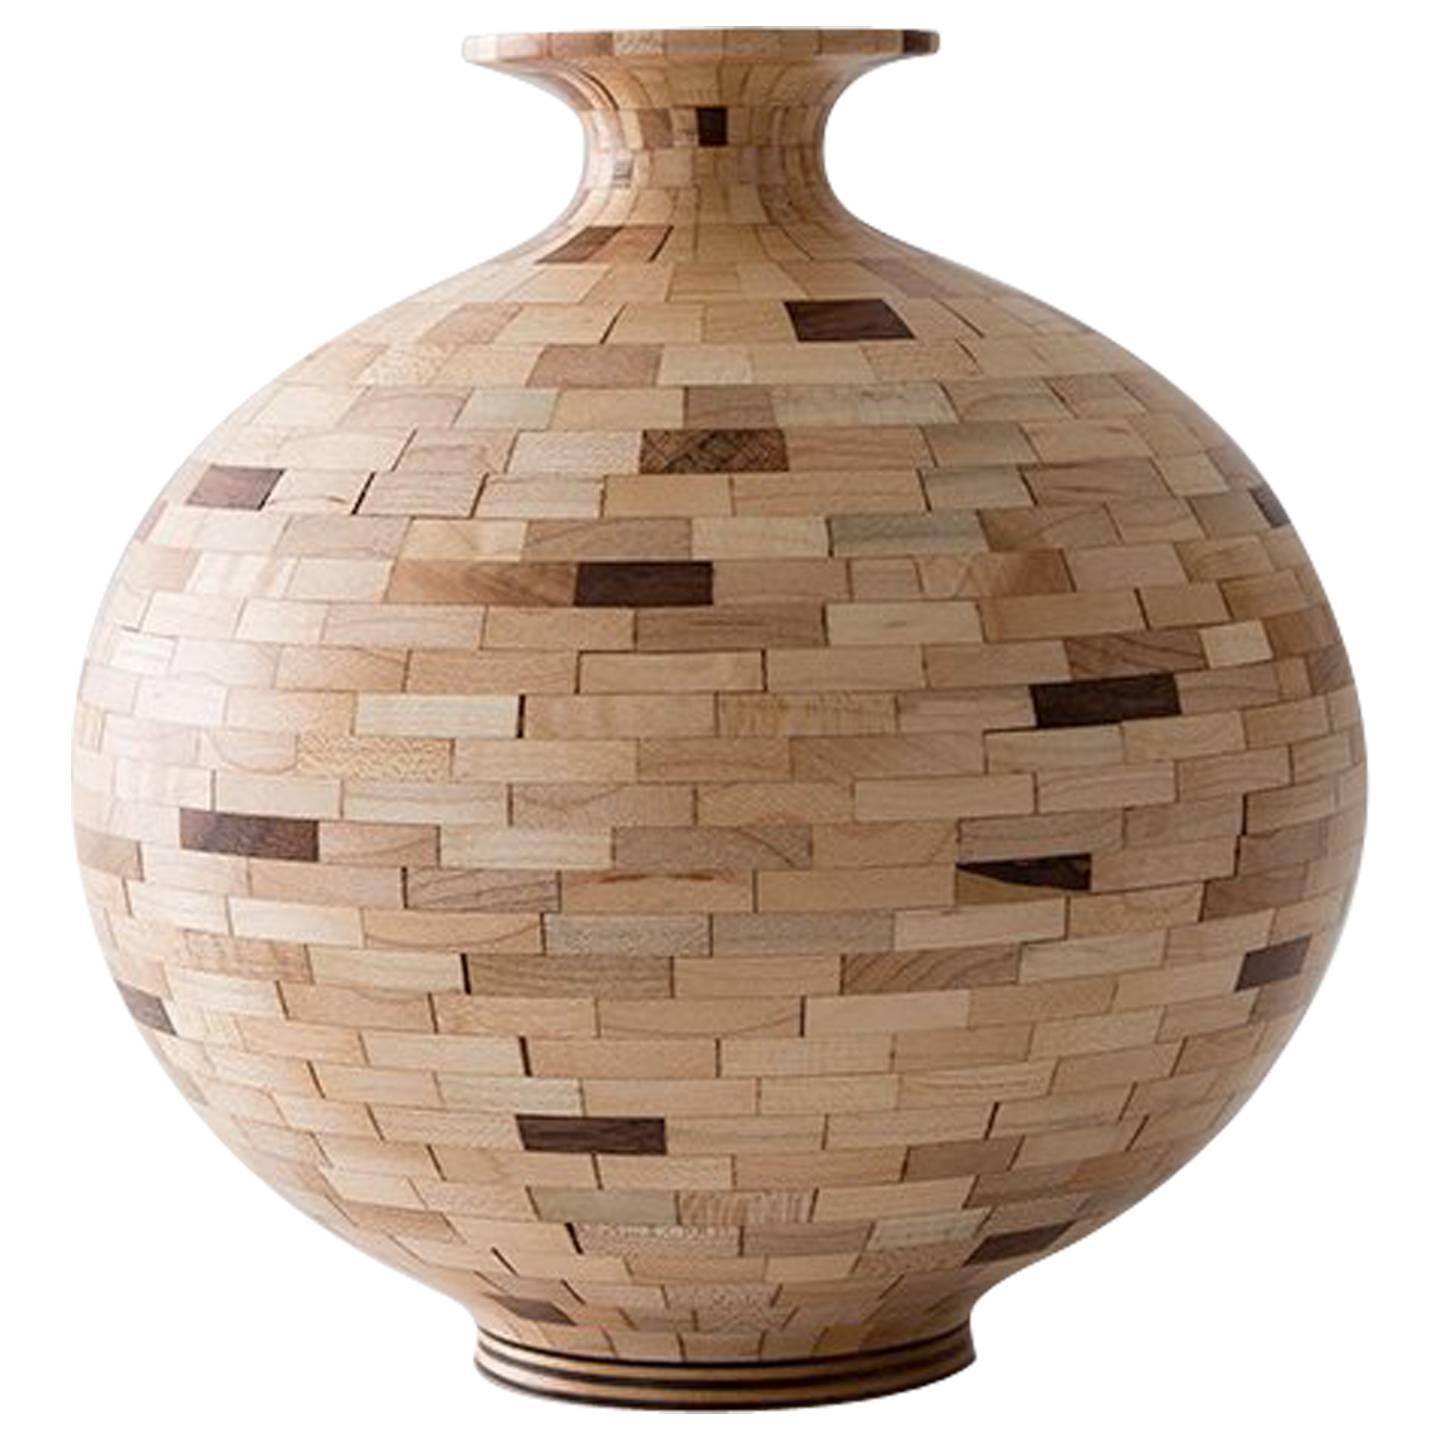 STACKED Walnut and Maple Patterned Vase by Richard Haining, Available Now